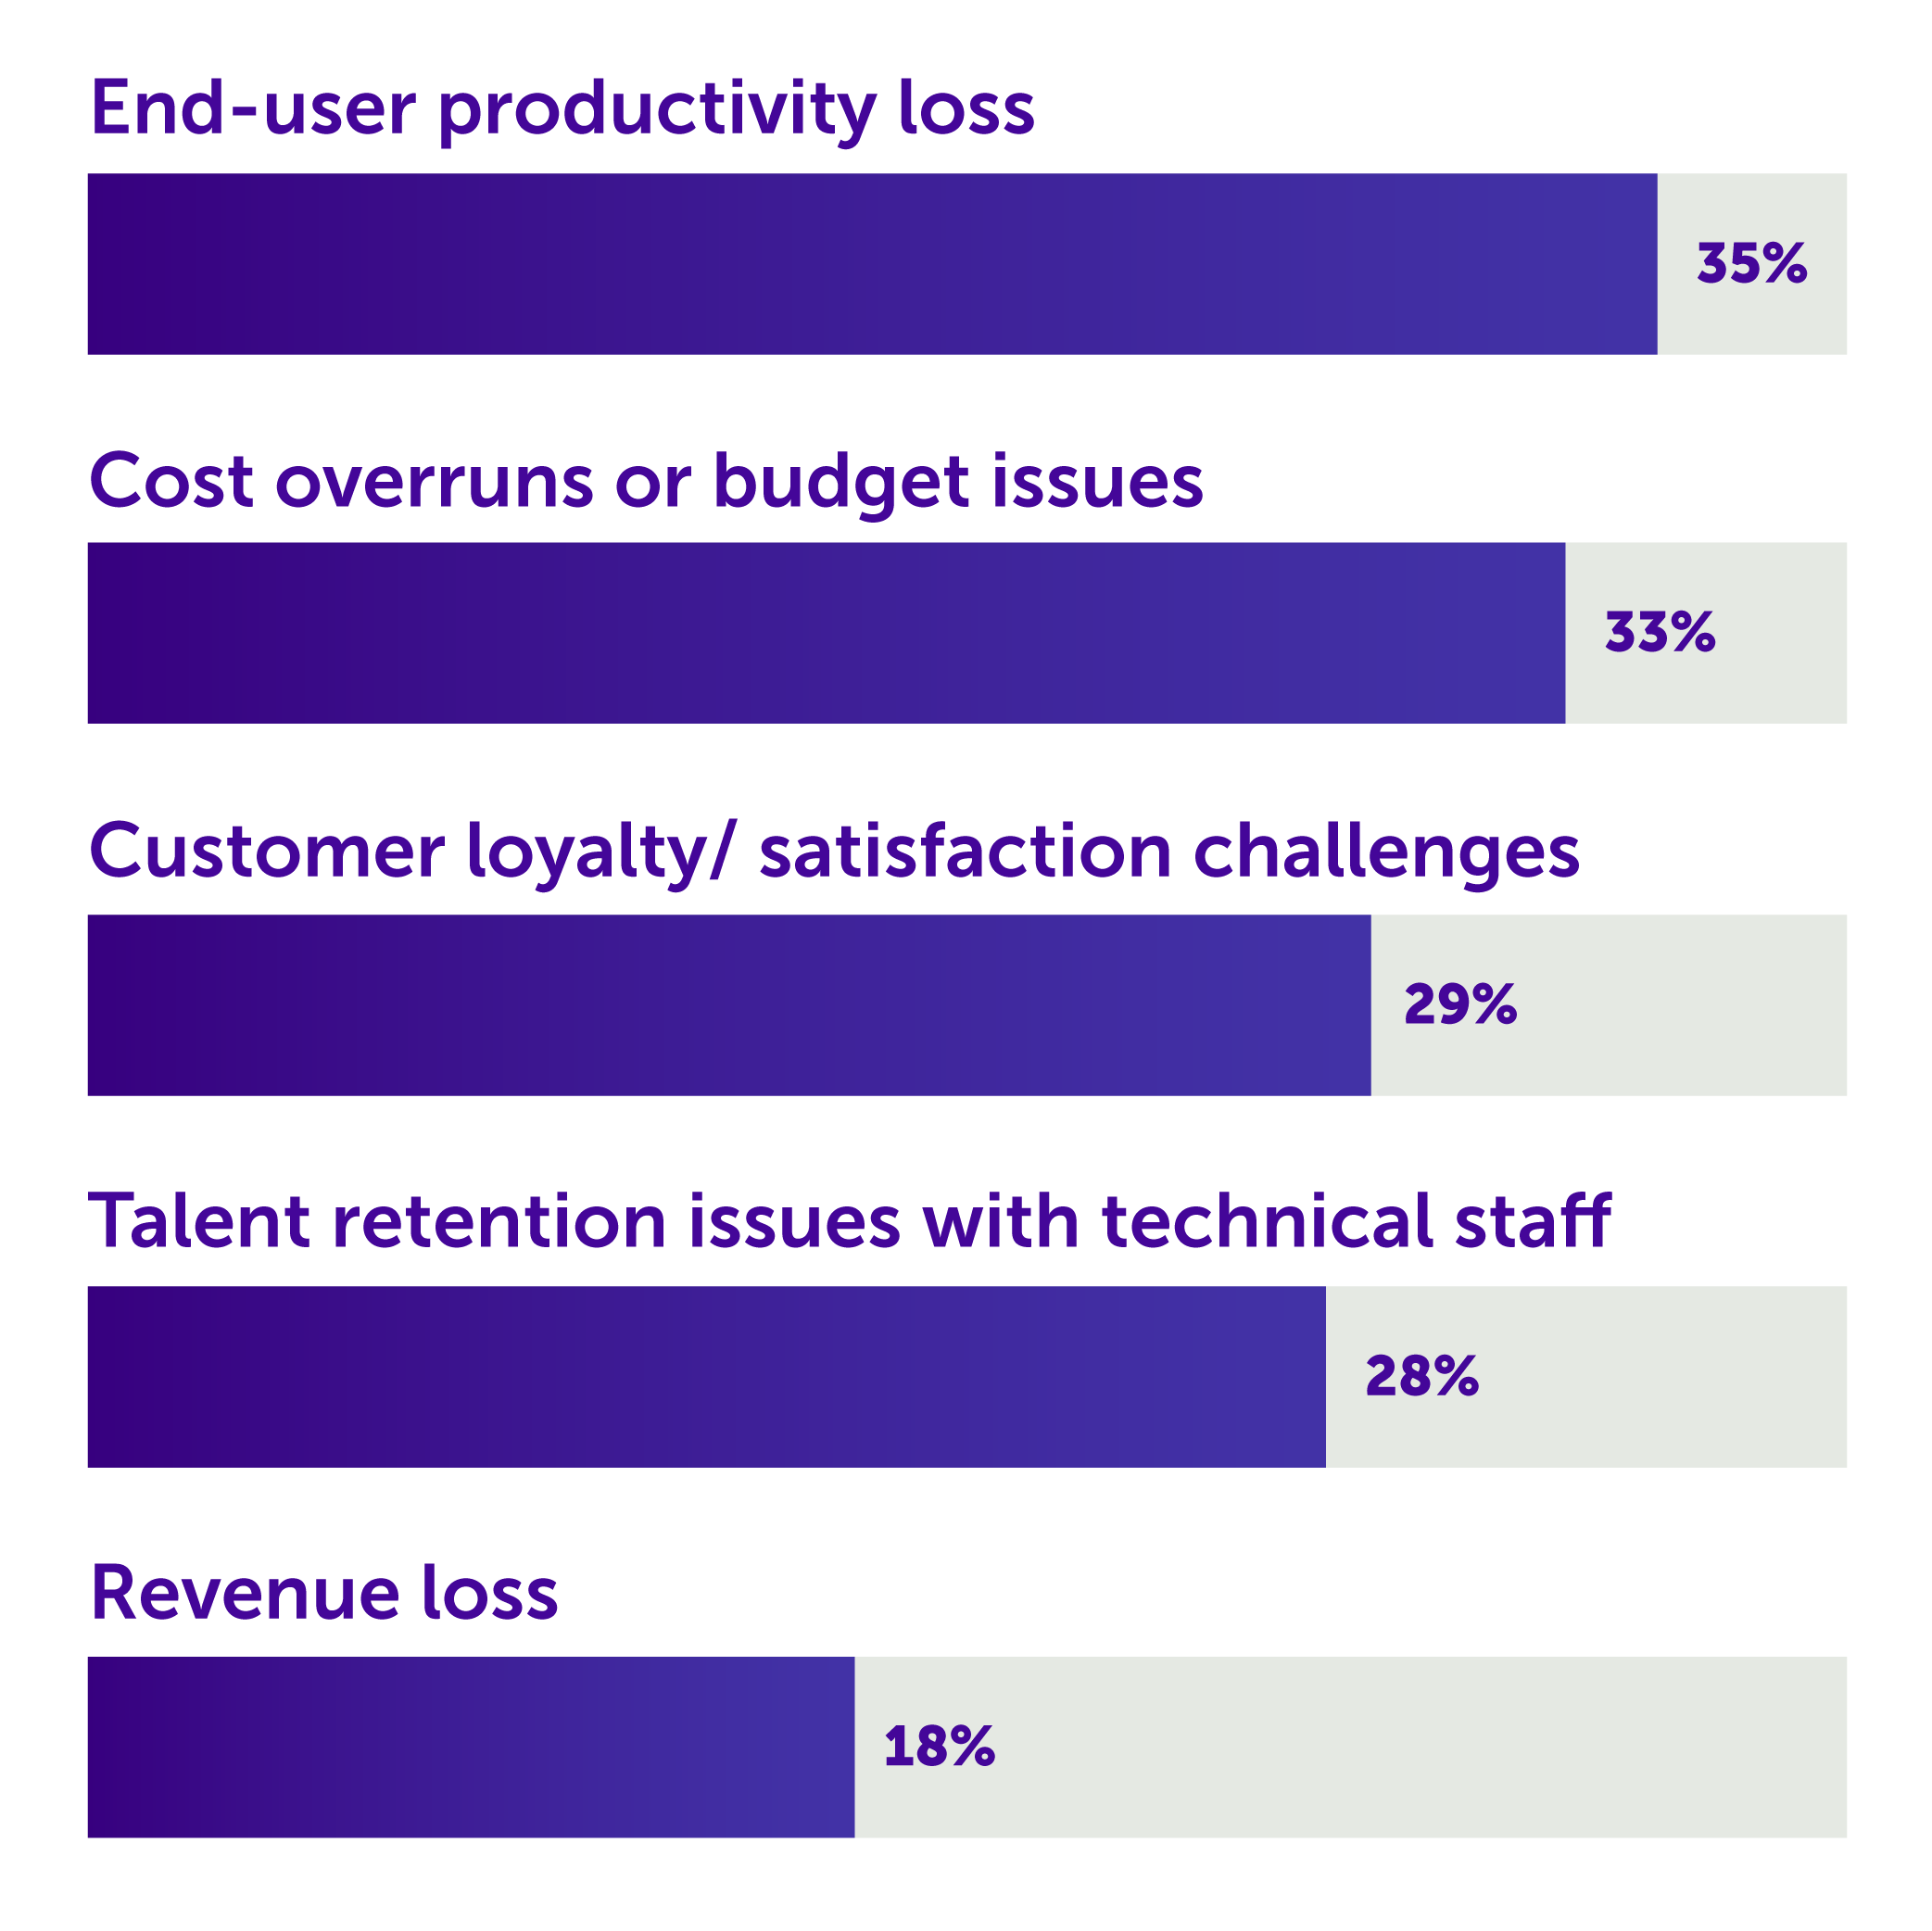 As reported by EMA survey respondents, business problems caused over the last year by challenges to network and cloud team collaboration